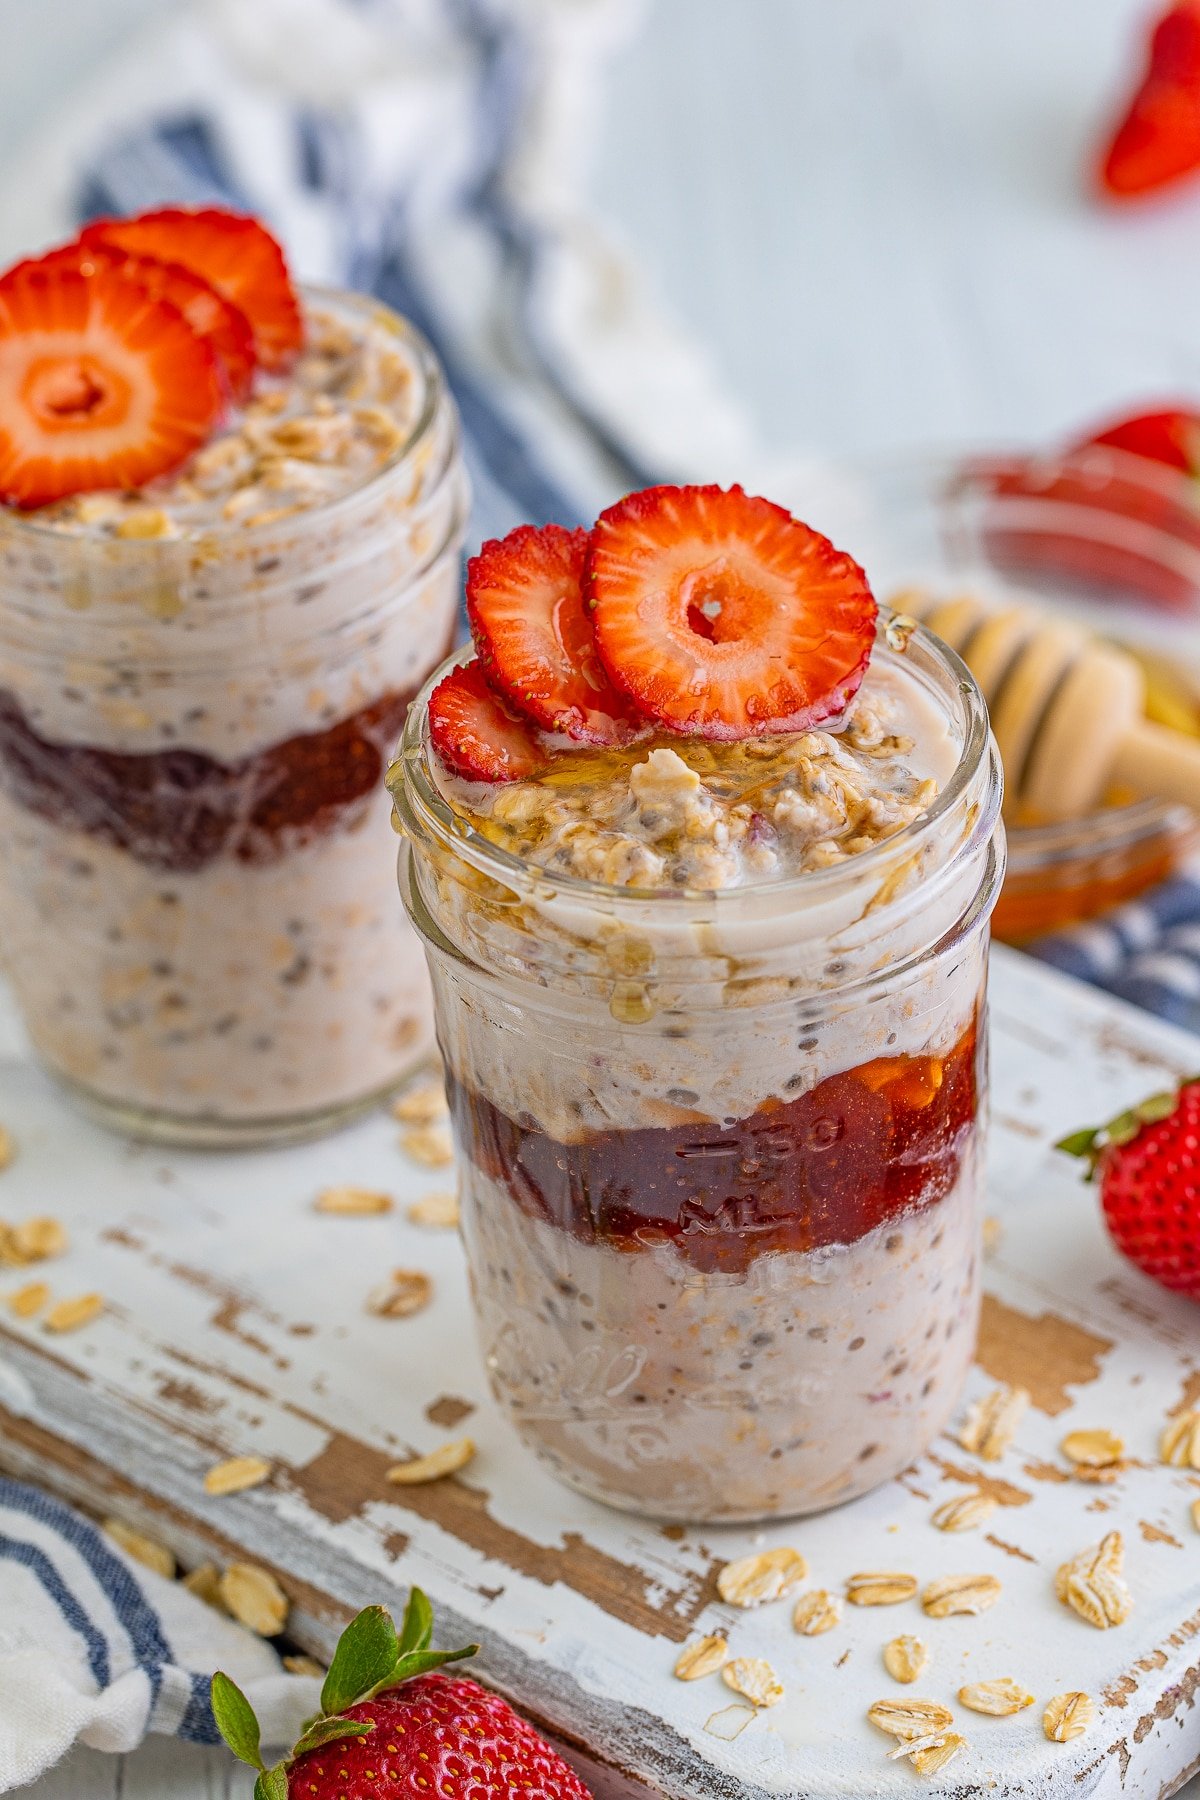 Strawberry Overnight oats shown layered in a mason jar on a white wooden serving platter, fresh strawberries, striped blue linen, and honey dipper in the background